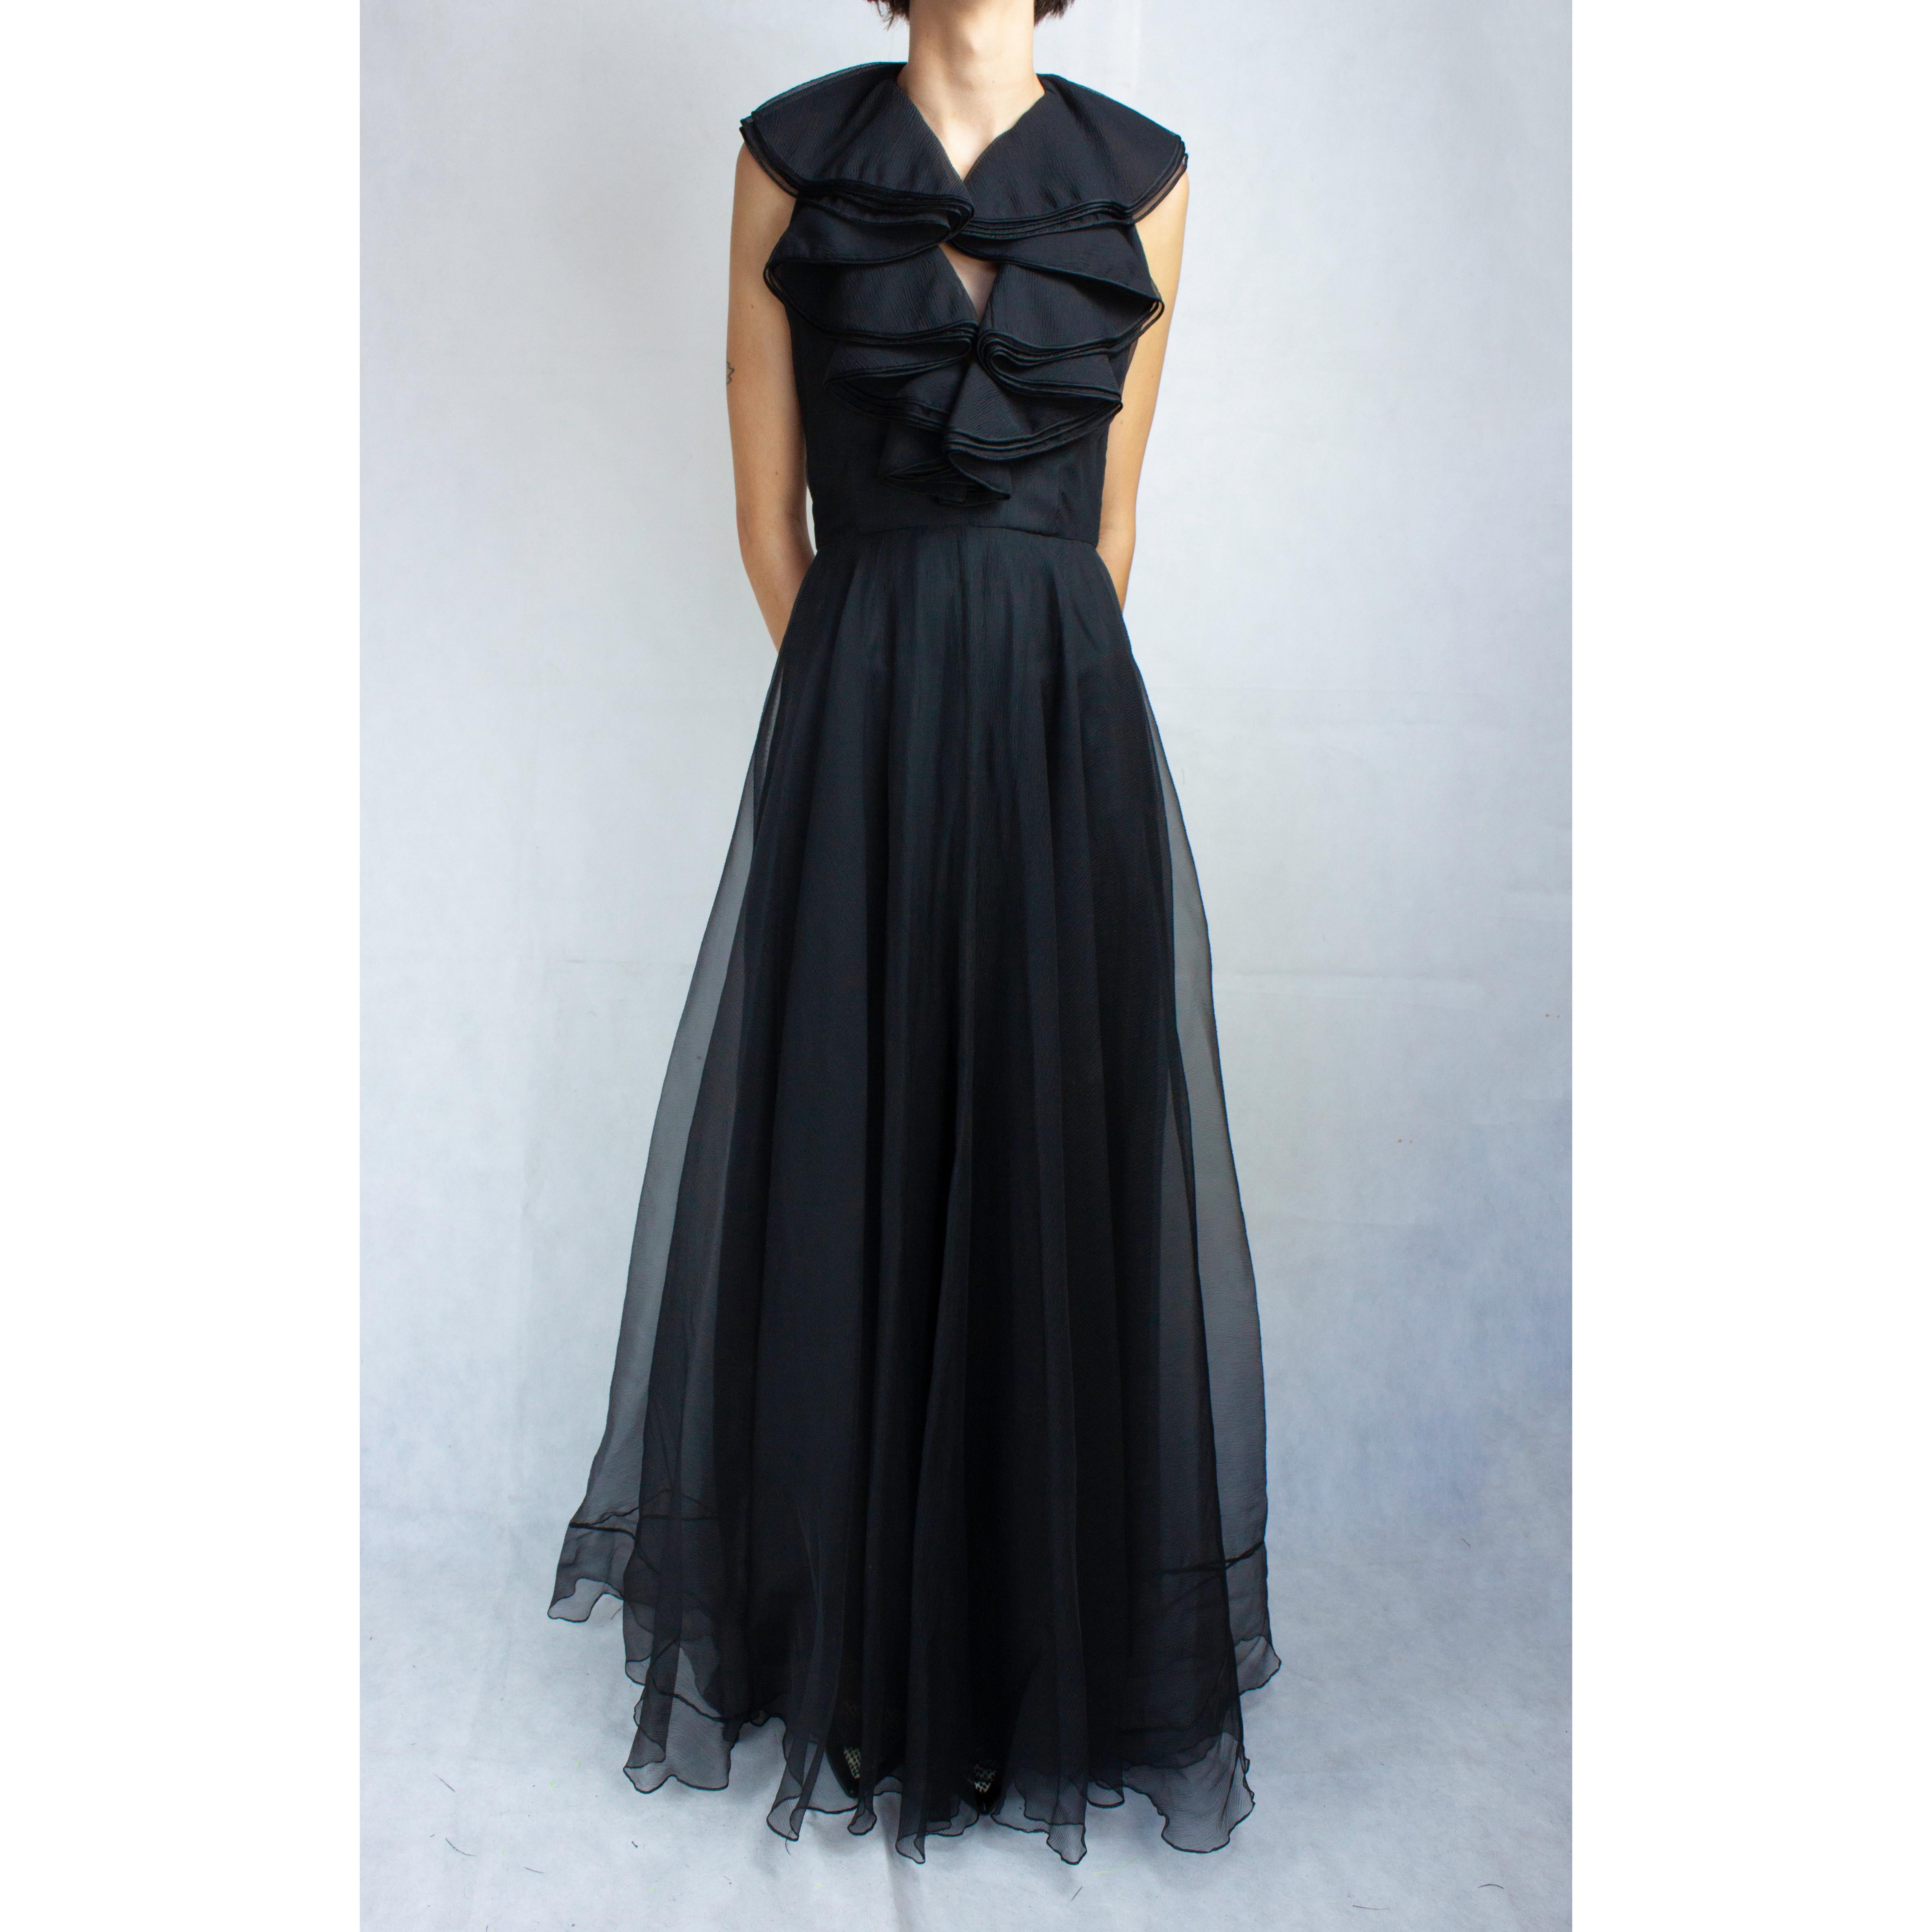 Christian Dior said “The evening is a time when you escape the realities of everyday life”. 
This idea is definitely embodied within this exquisite evening gown from the renowned French couture label.

The dress was designed by one of the house’s